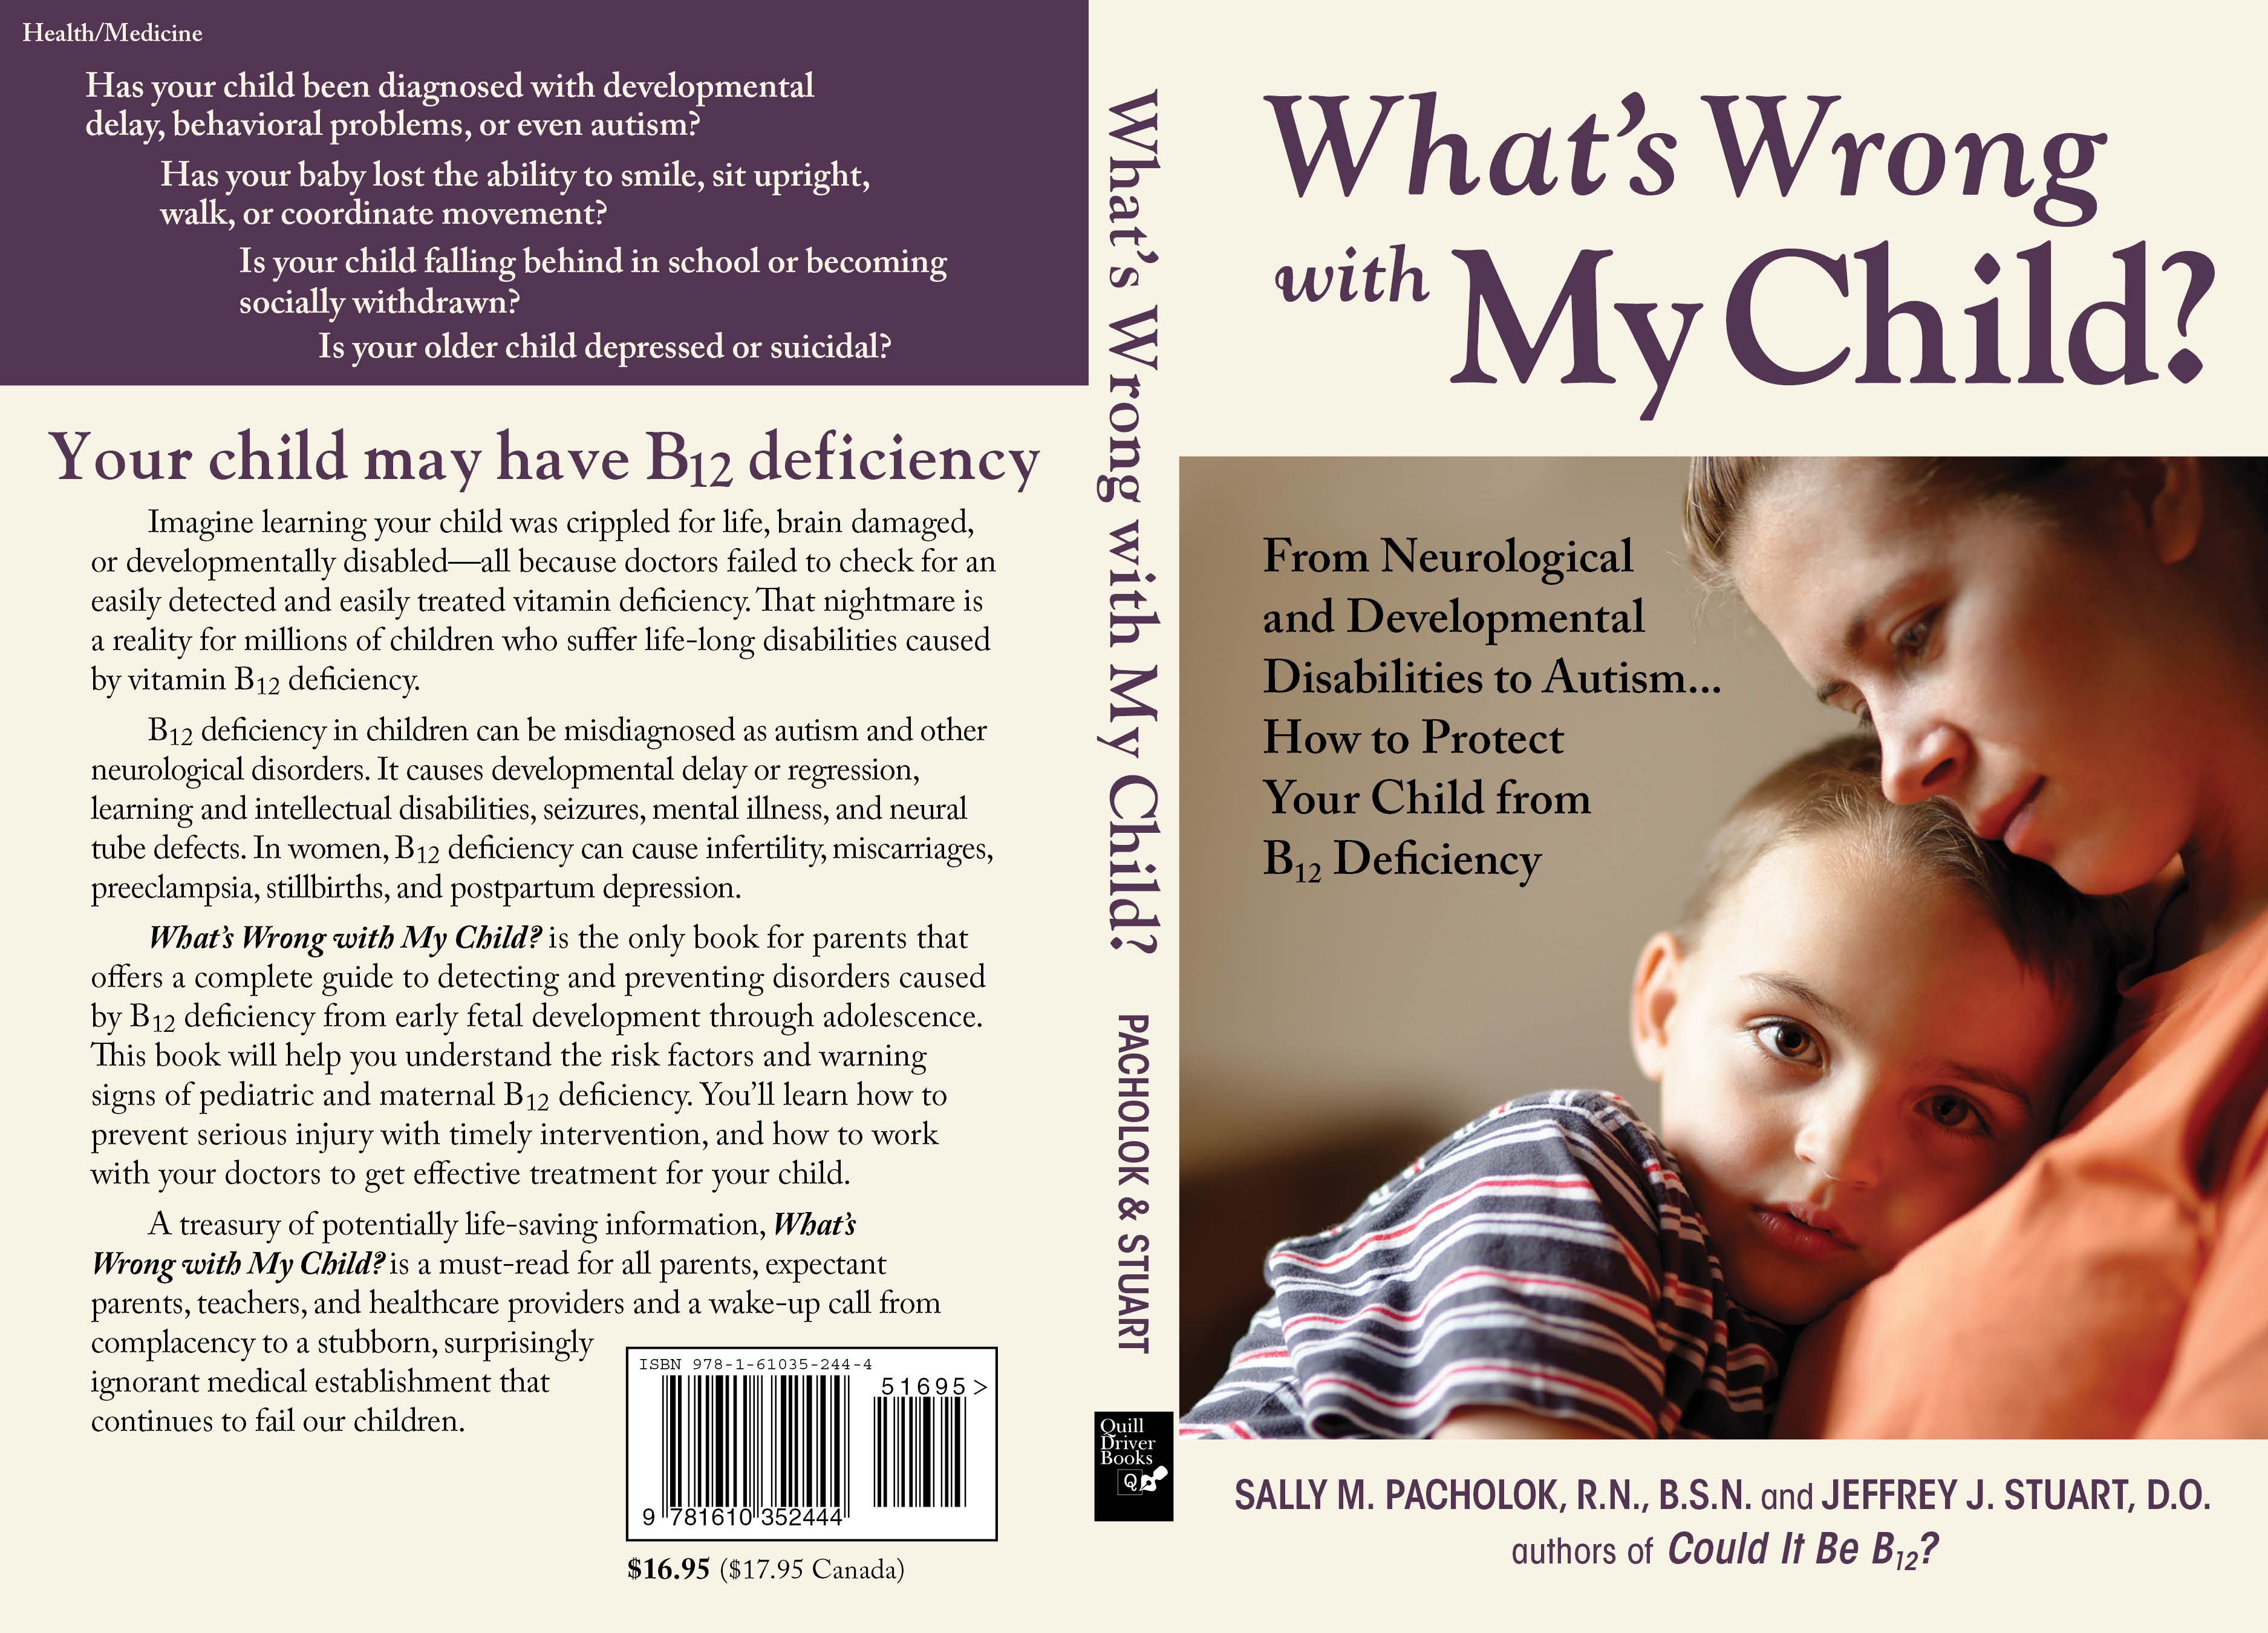 What's Wrong with My Child Cover Spread